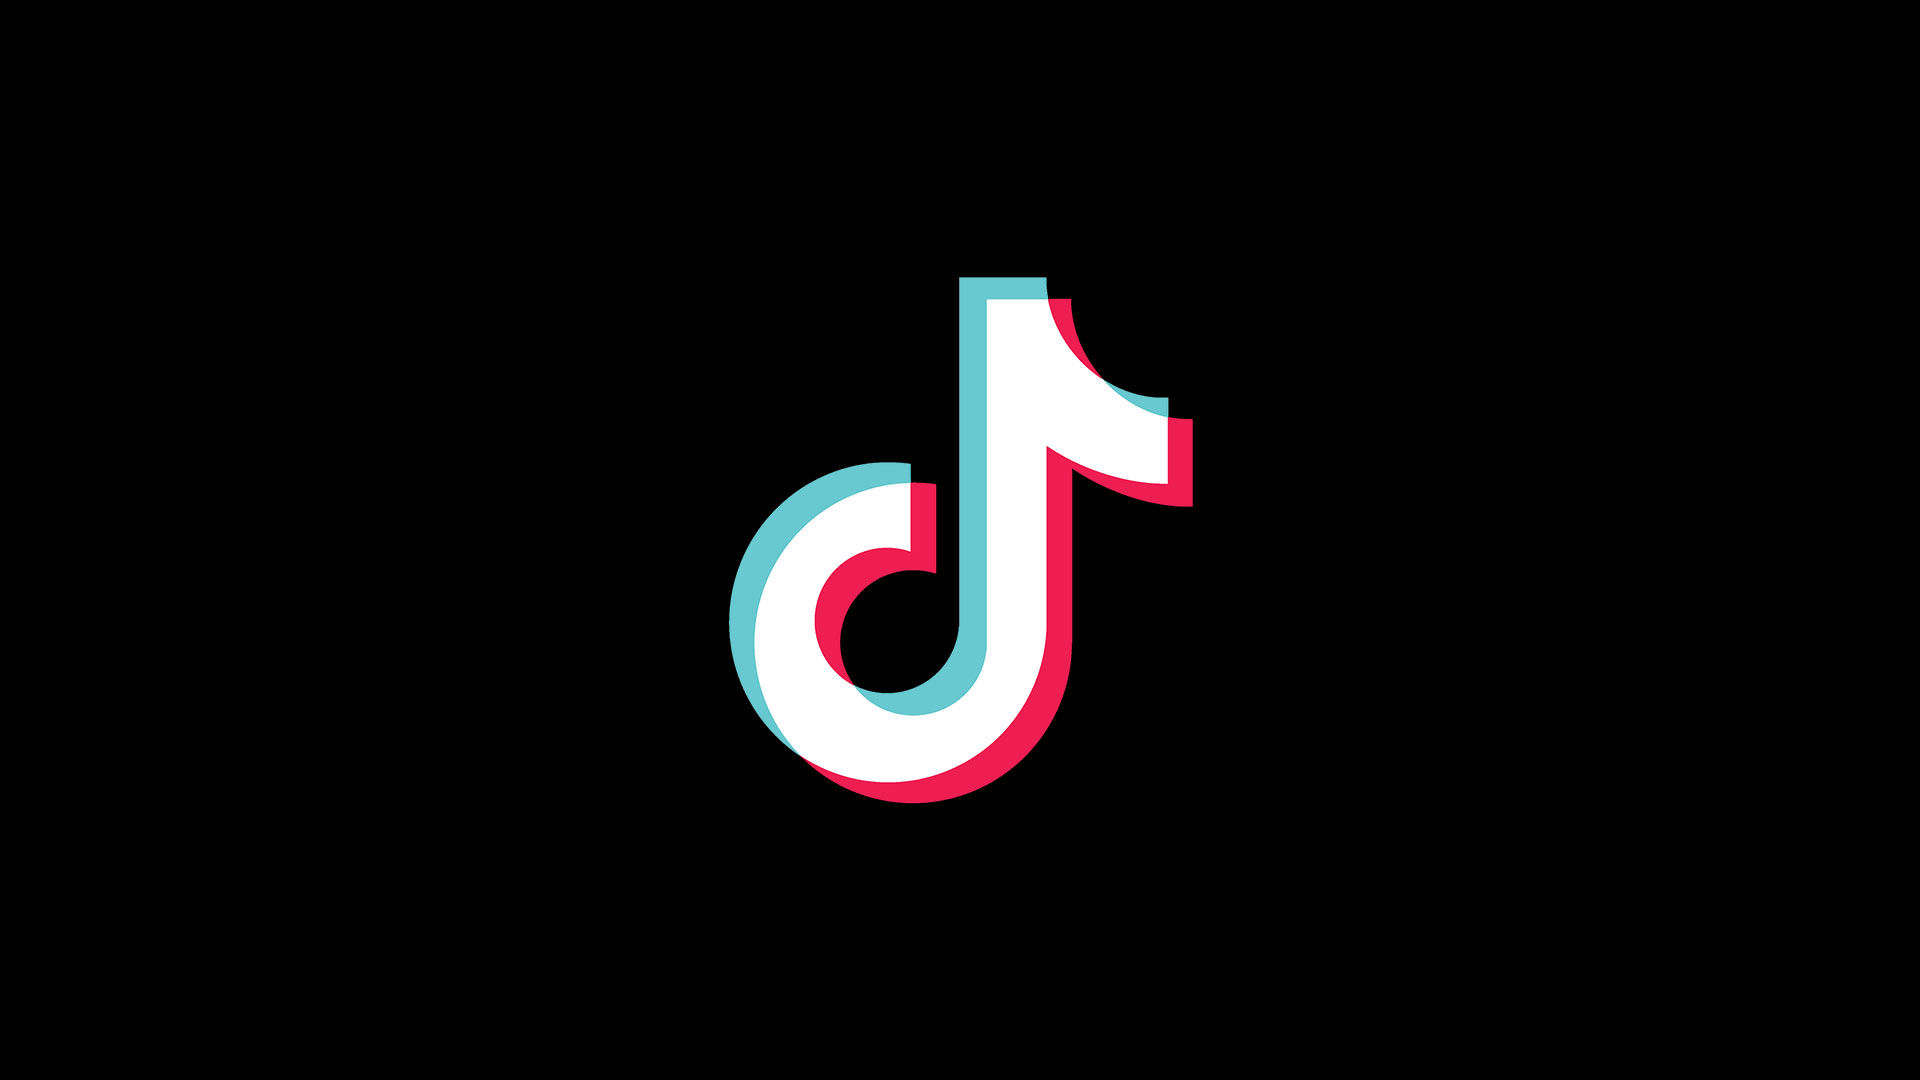 How to Use the Sad Crying Face Filter on TikTok - Techozu